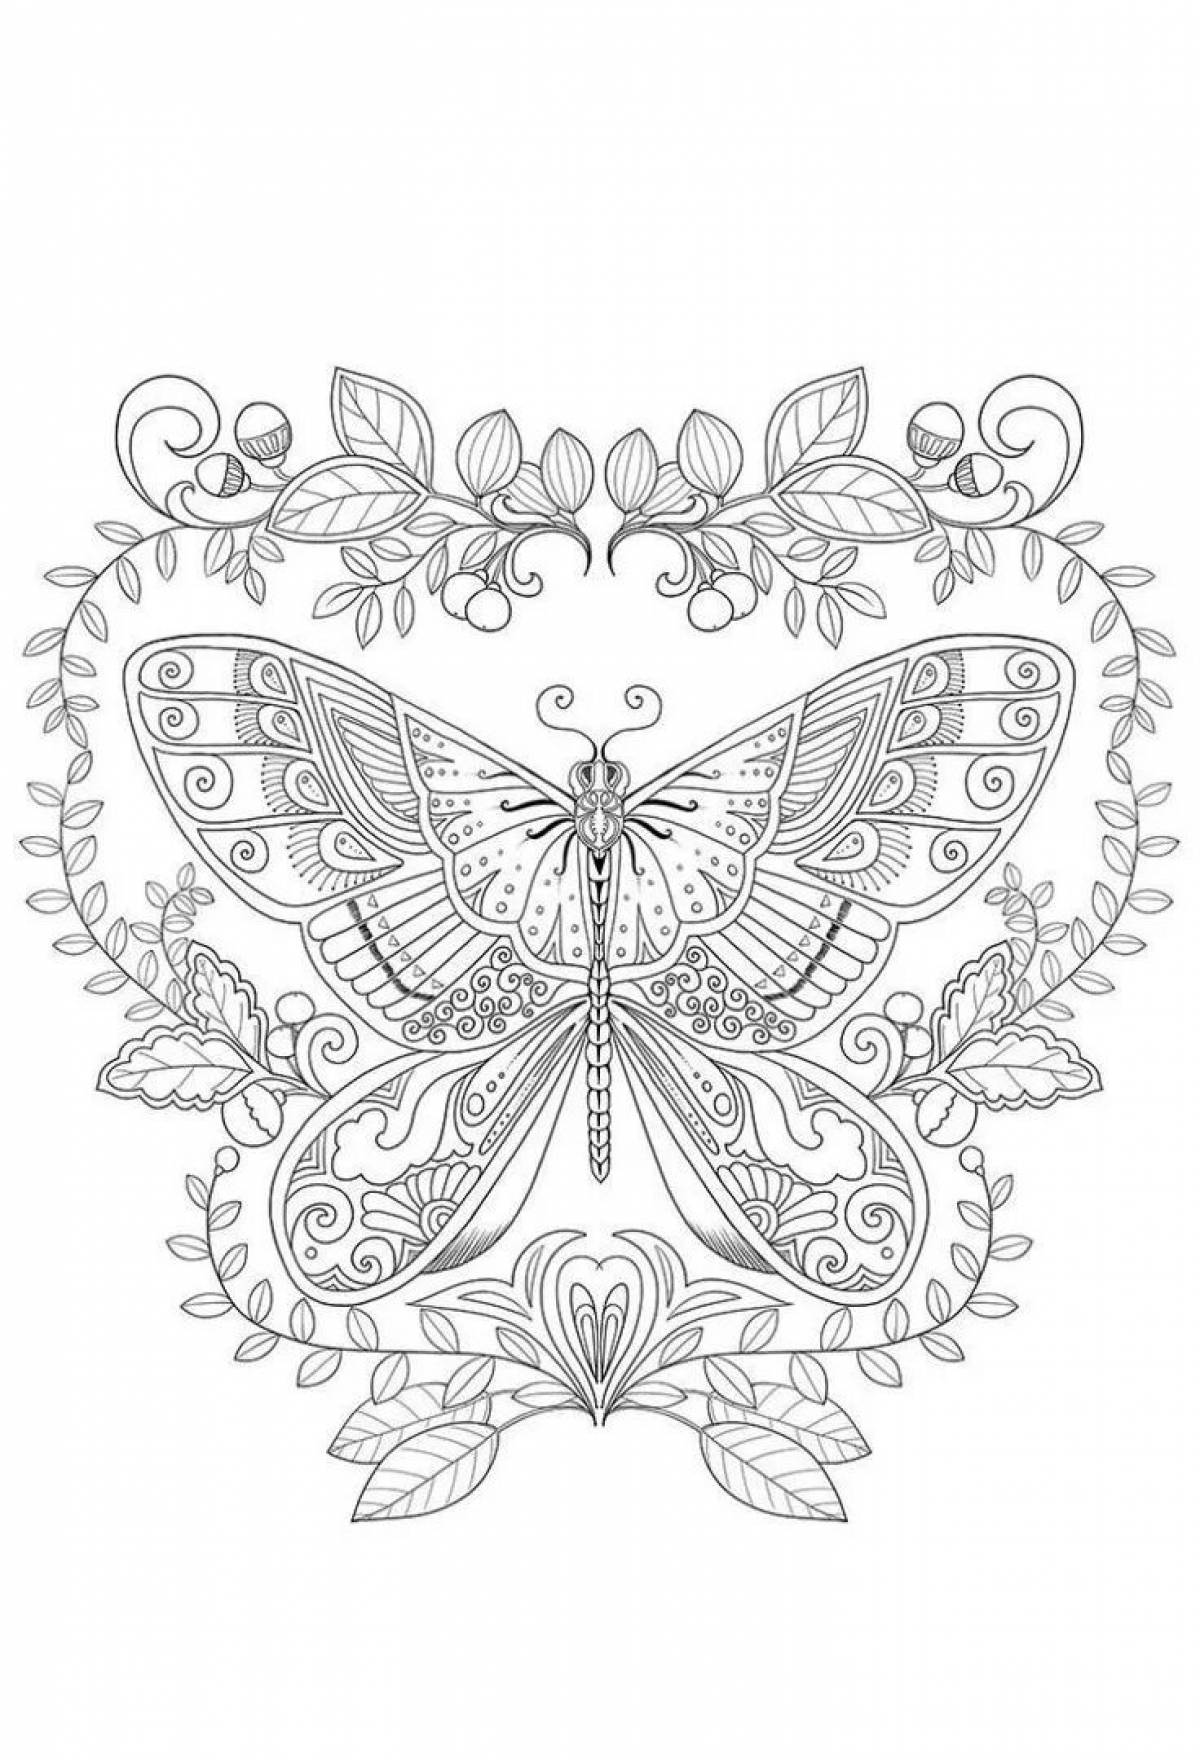 Exalted coloring page butterfly complex